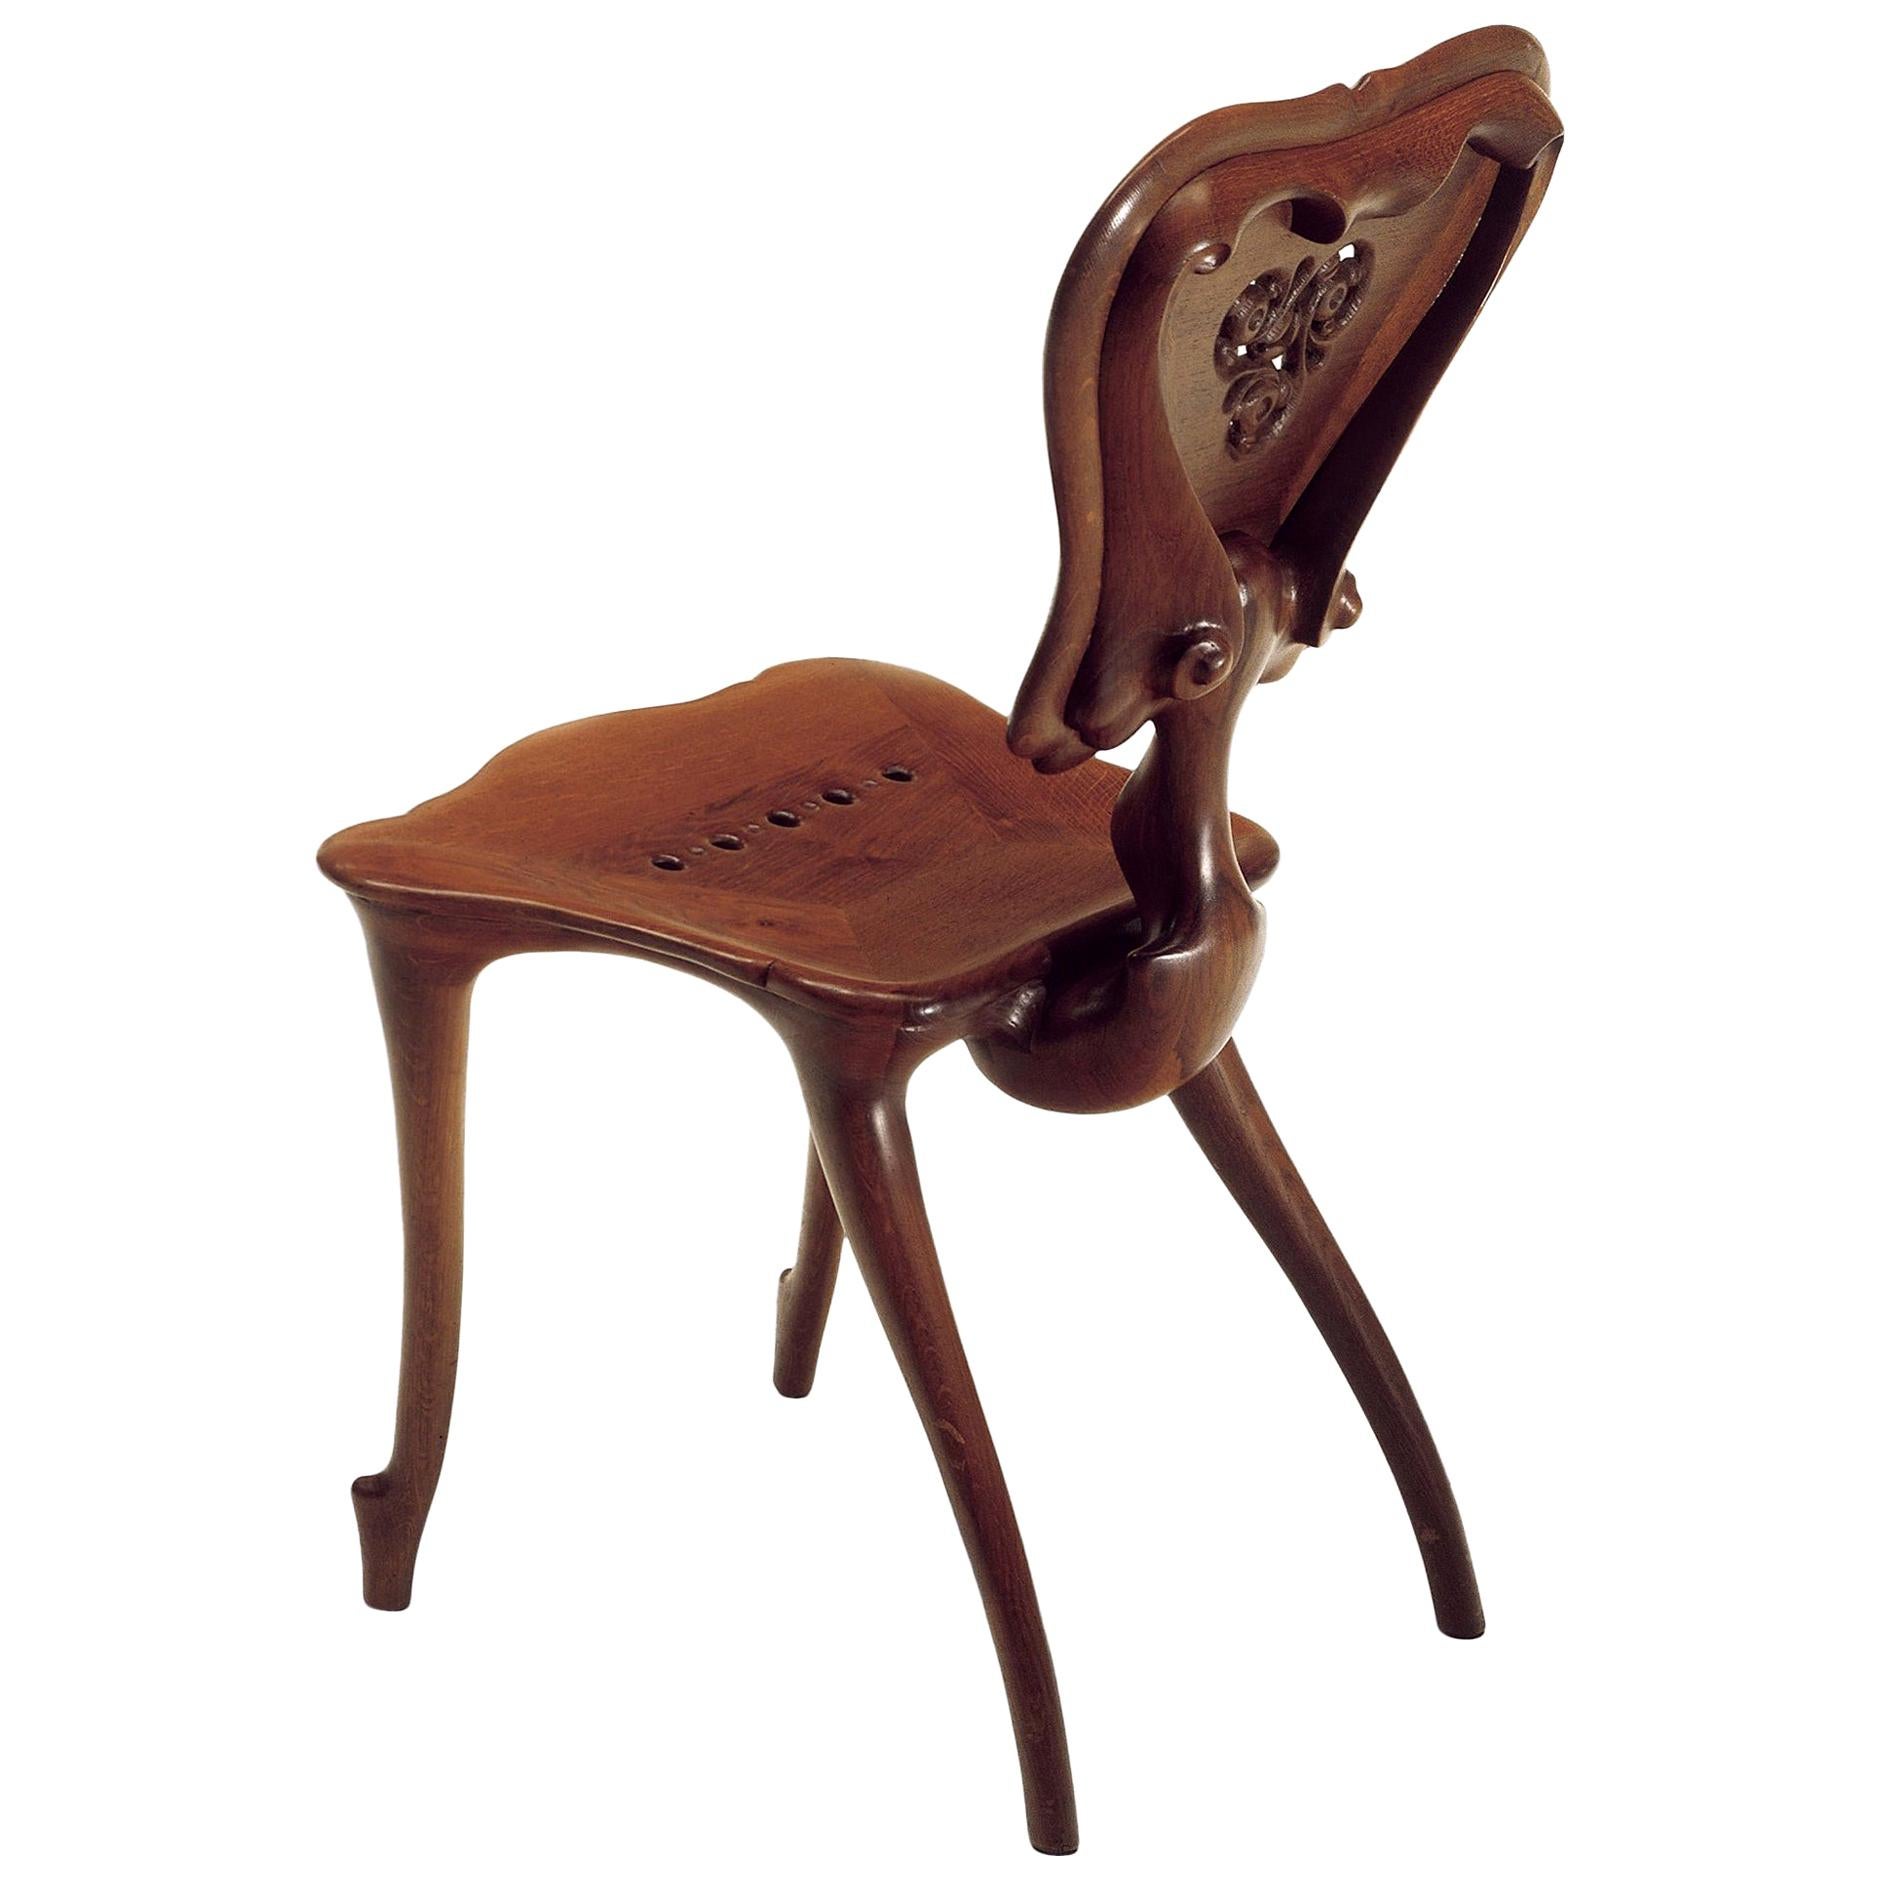 Calvet chair in solid oak by Antoni Gaudí For Sale at 1stDibs